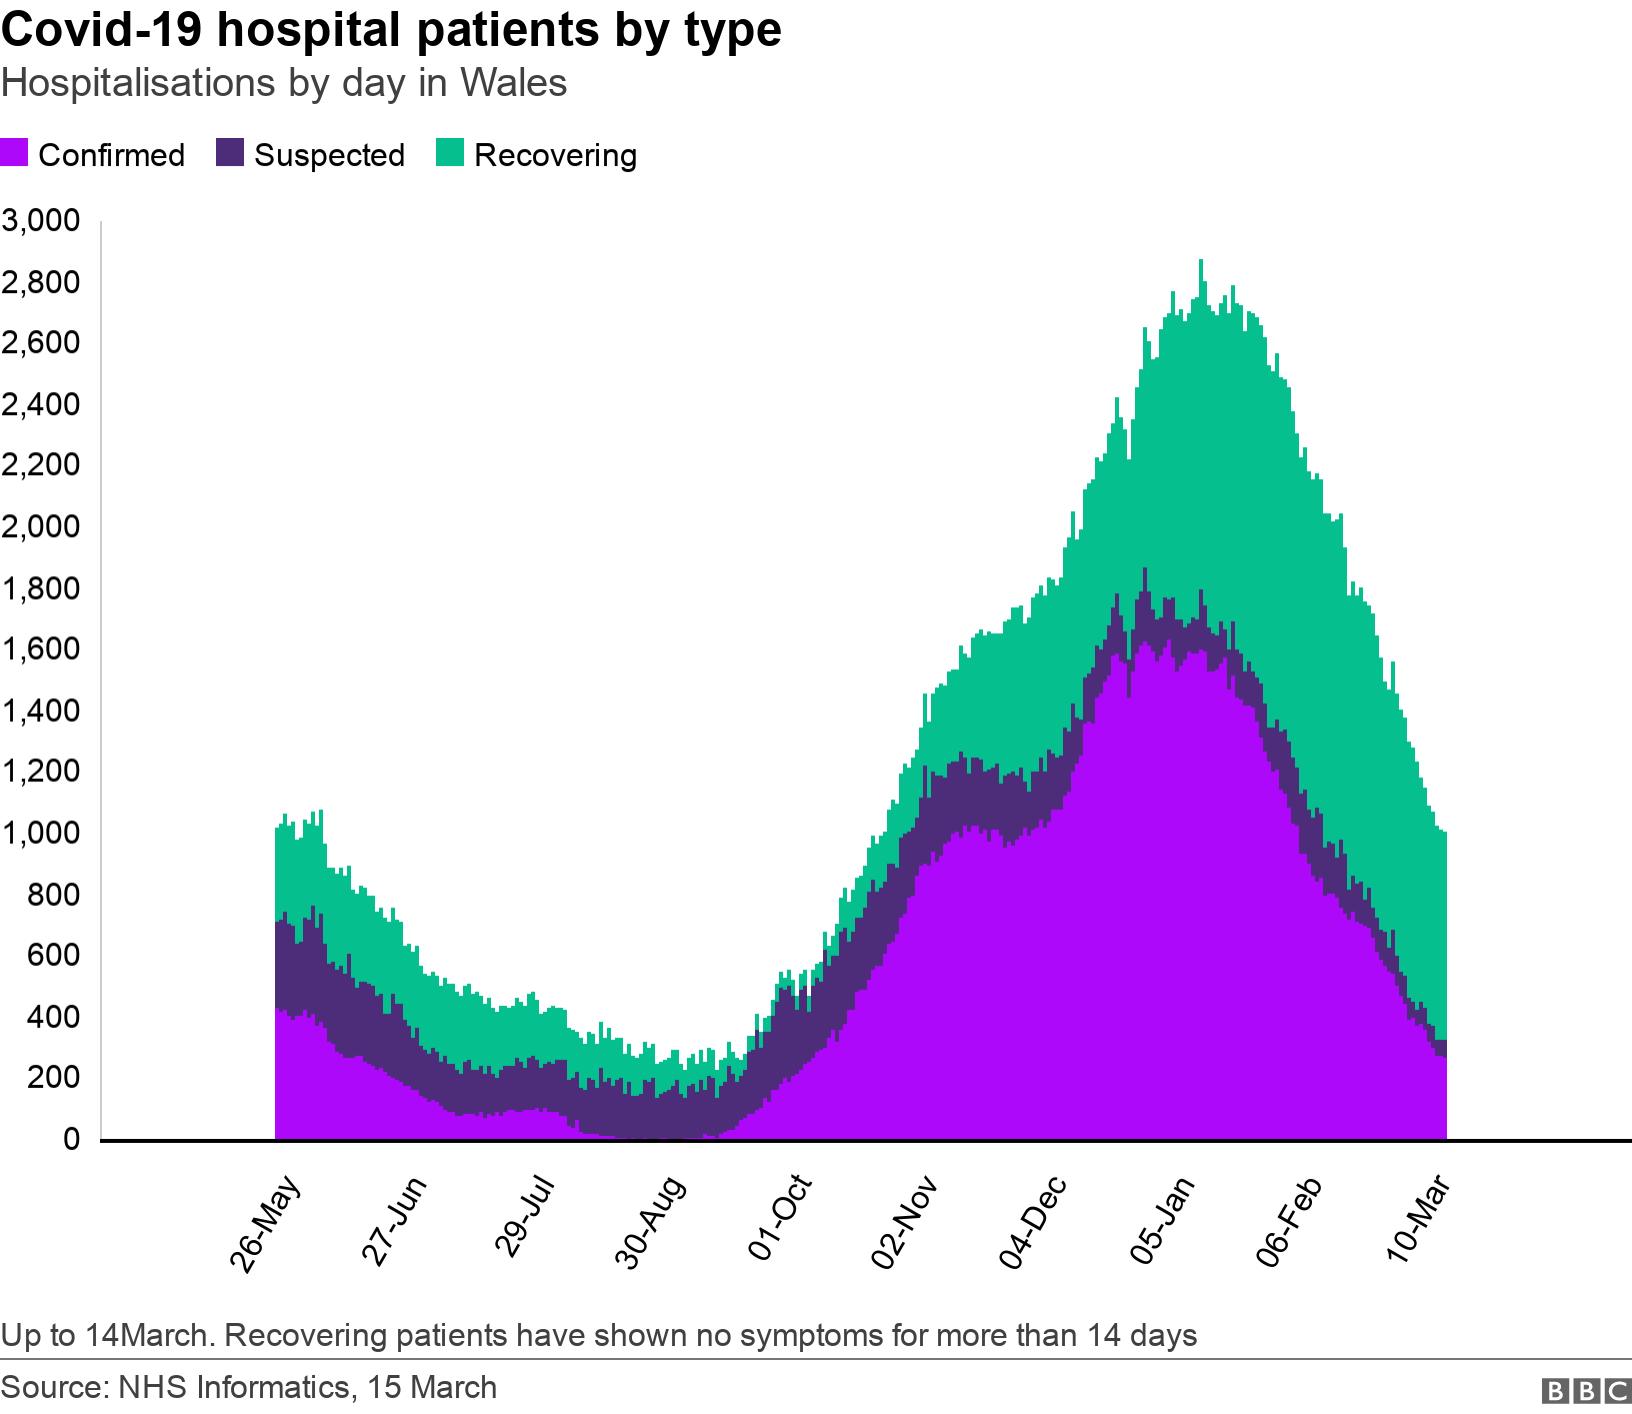 Covid-19 hospital patients by type. Hospitalisations by day in Wales.  Up to 14March. Recovering patients have shown no symptoms for more than 14 days.